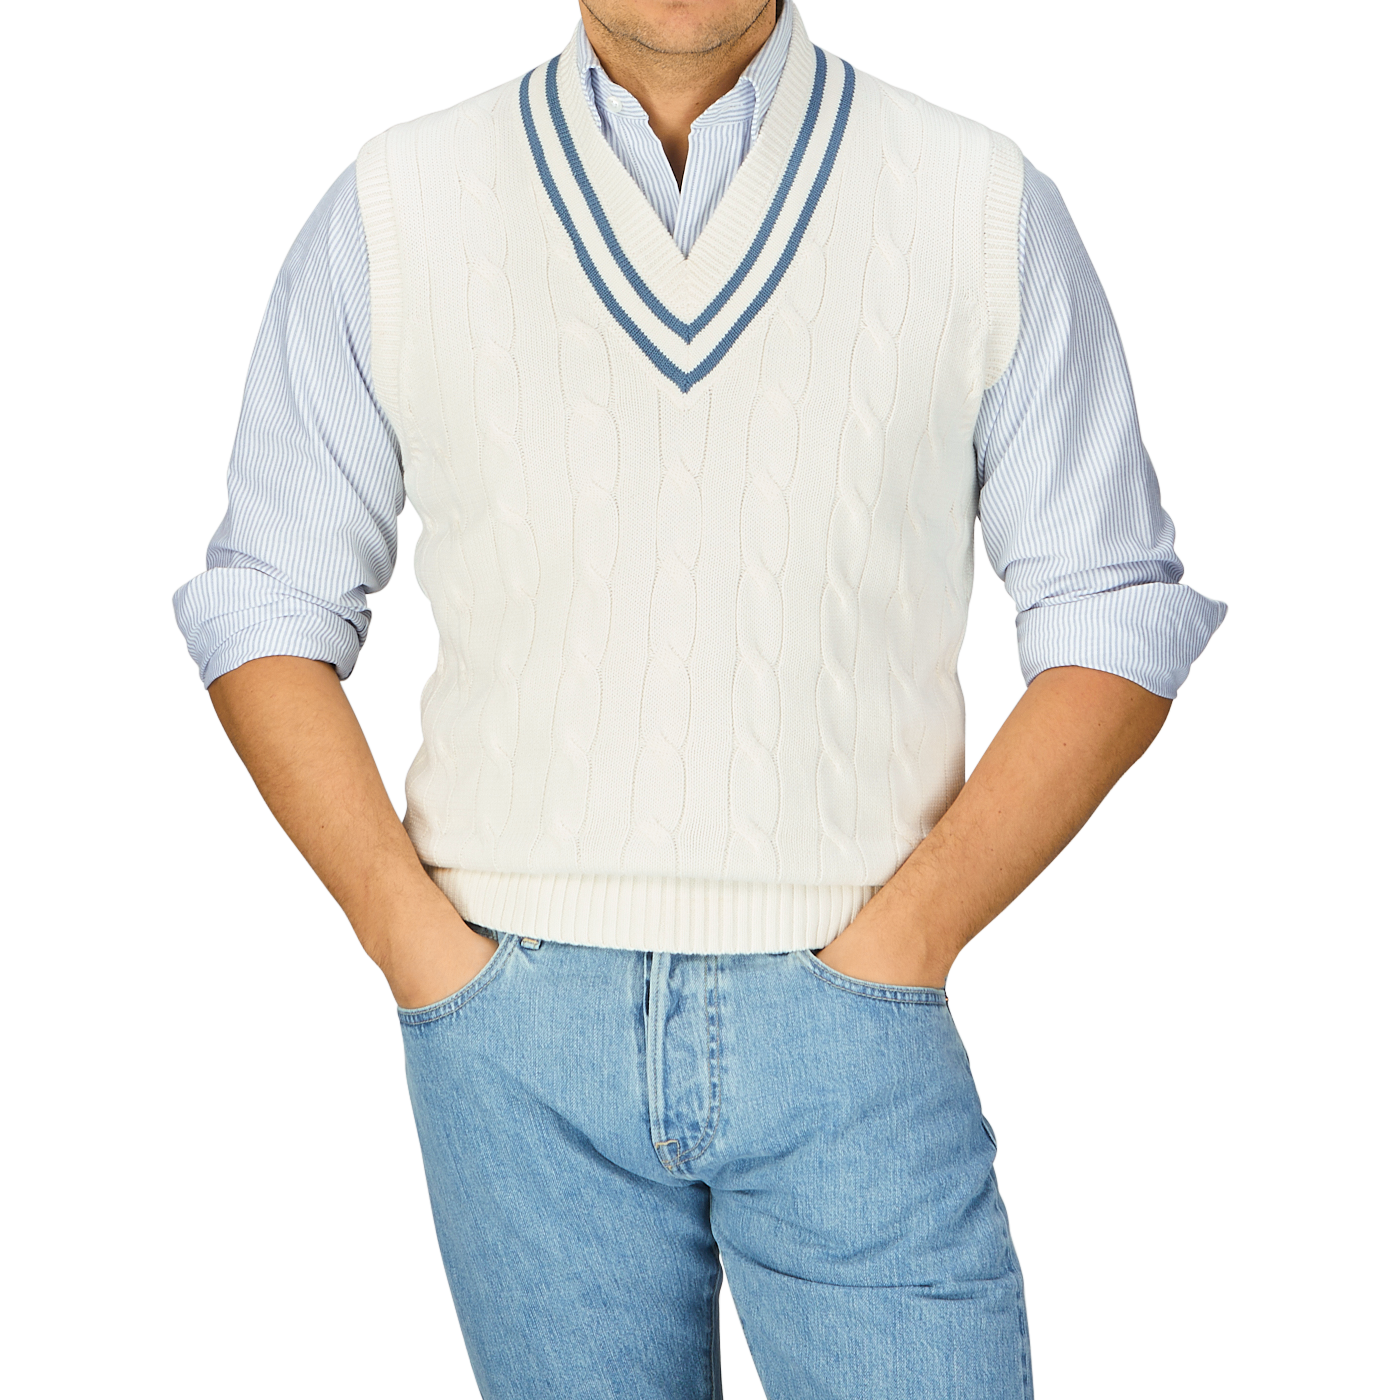 Man wearing a white Alan Paine Off-White Blue Striped Cotton Cricket Slipover over a blue-striped shirt with hands on hips.